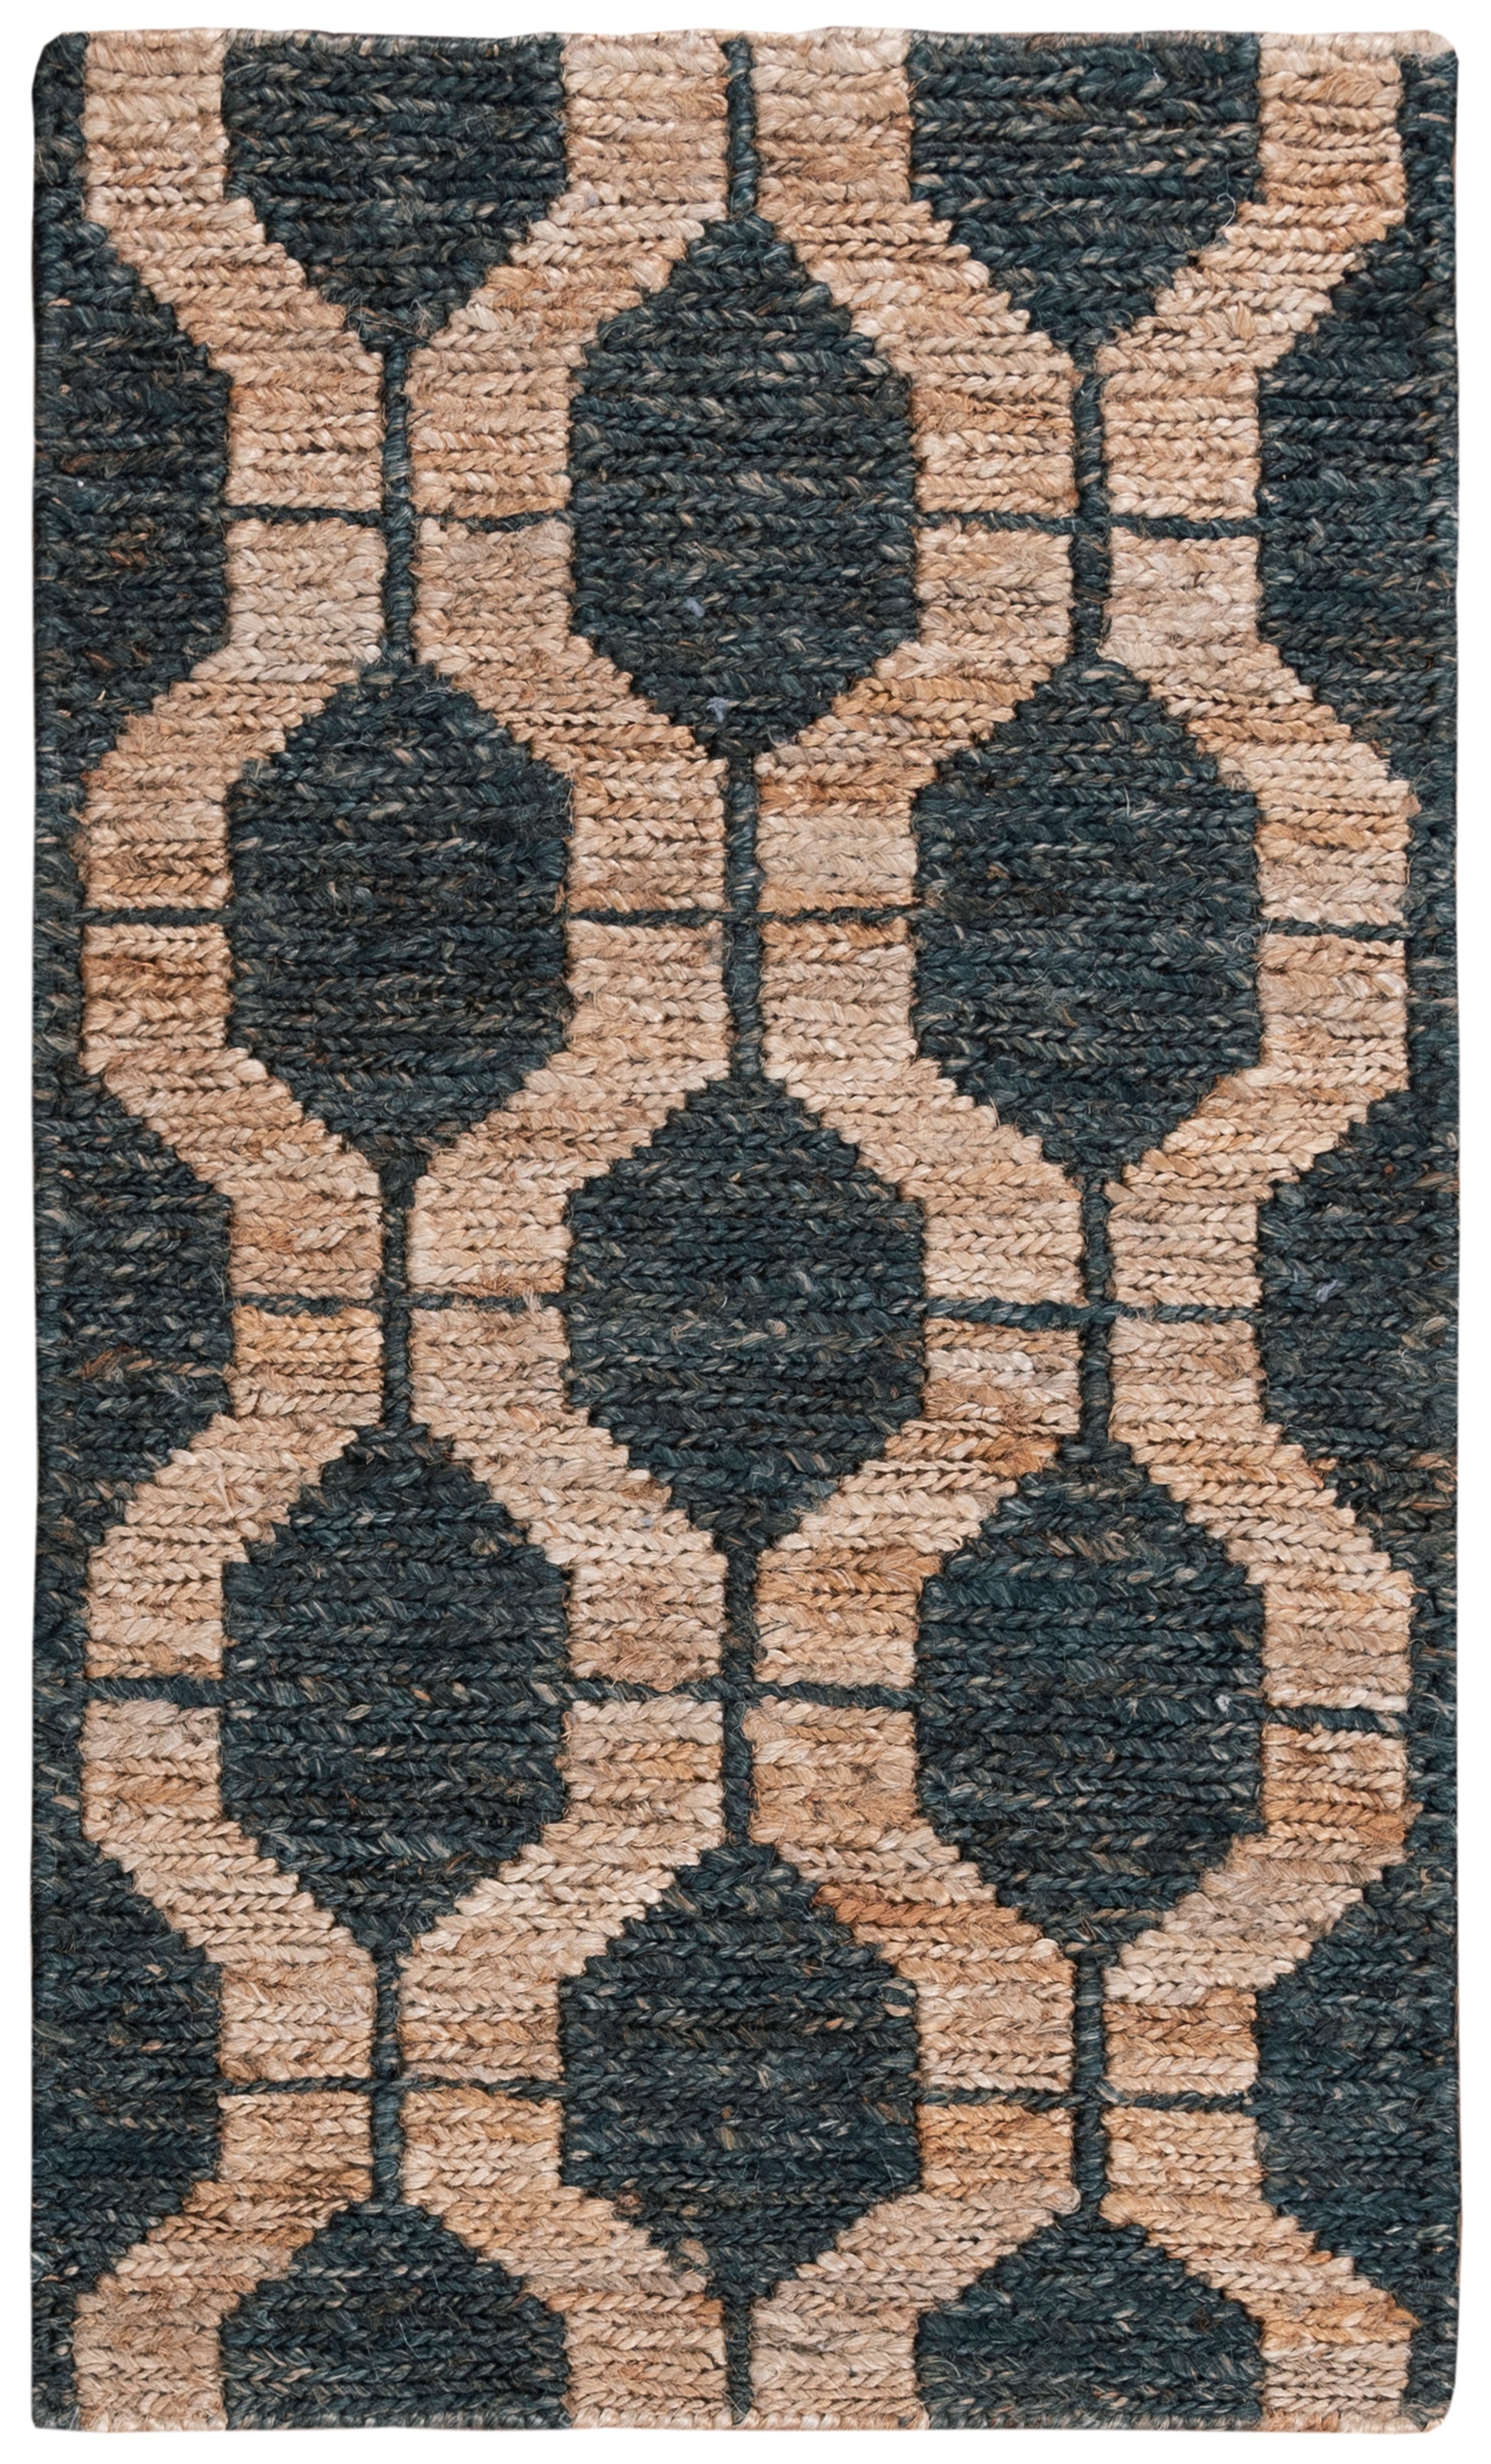 Rizzy Bengal Bnl940 Charcoal Area Rug